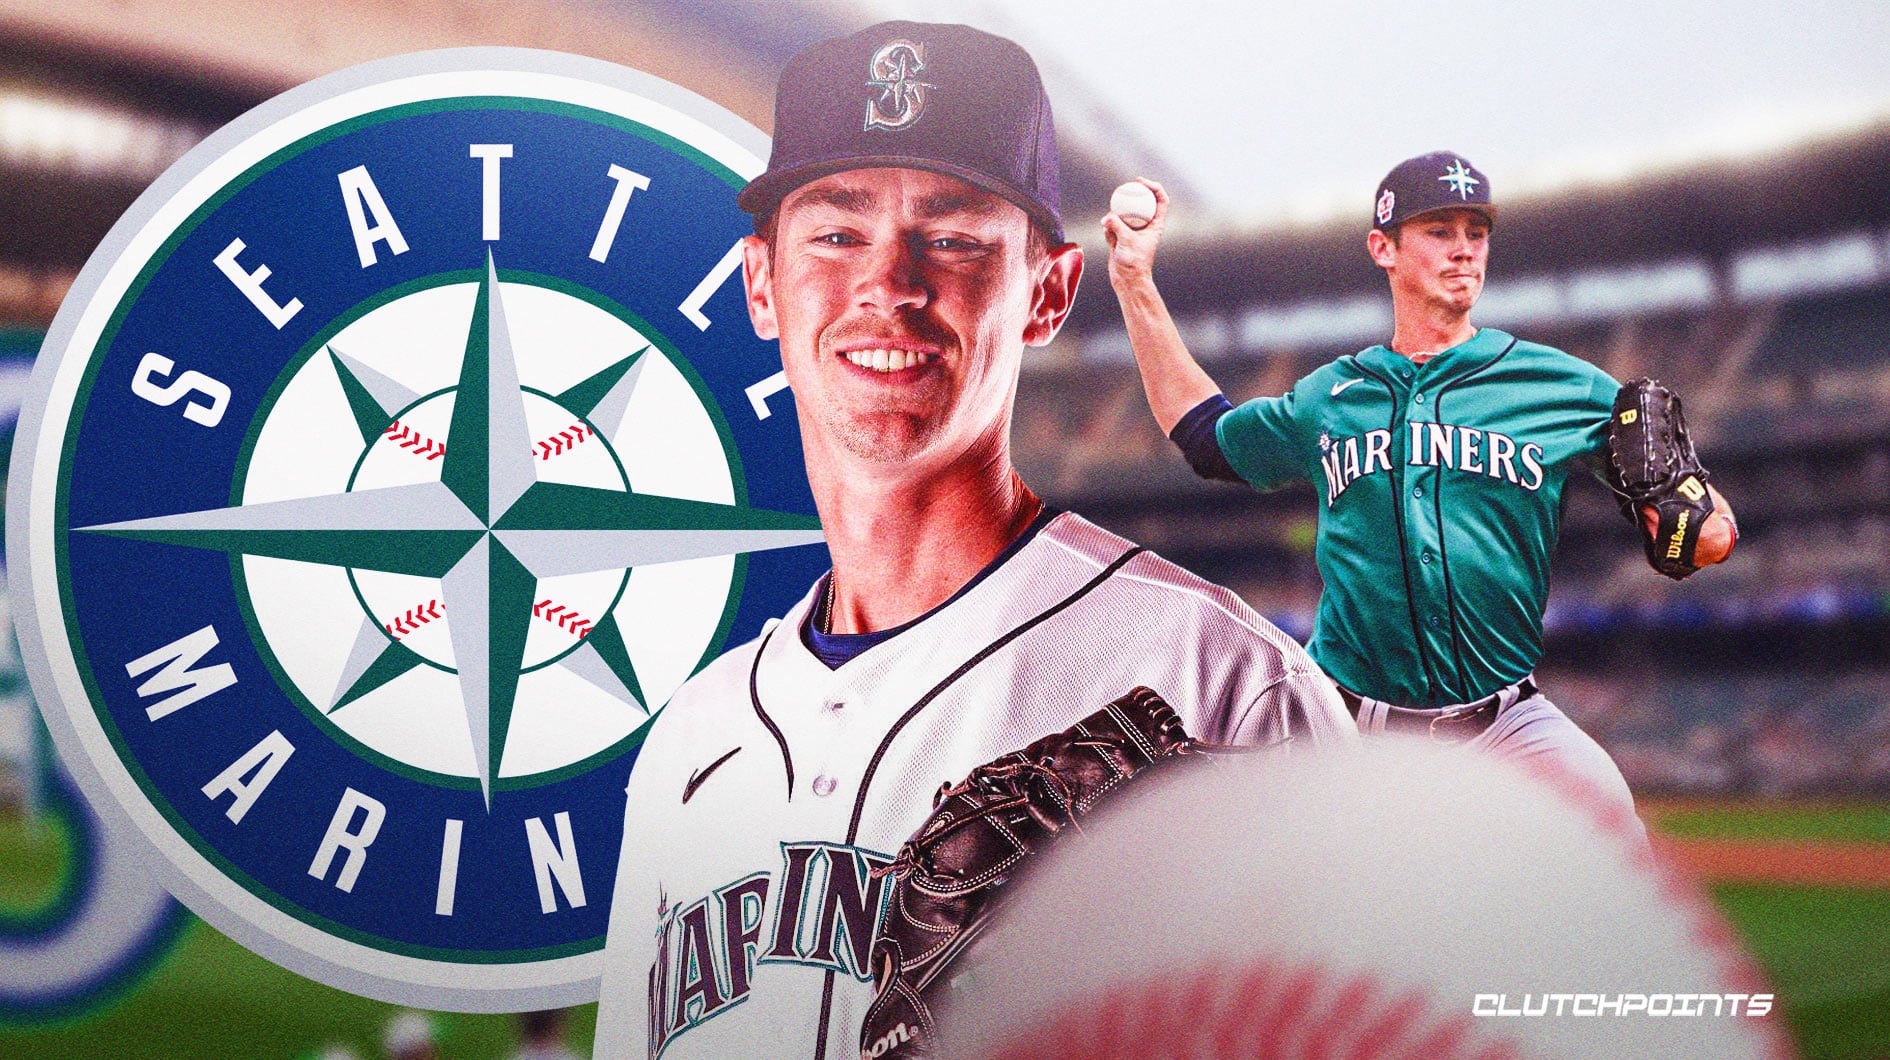 Mariners, Sea Dogs team up for jersey promotion